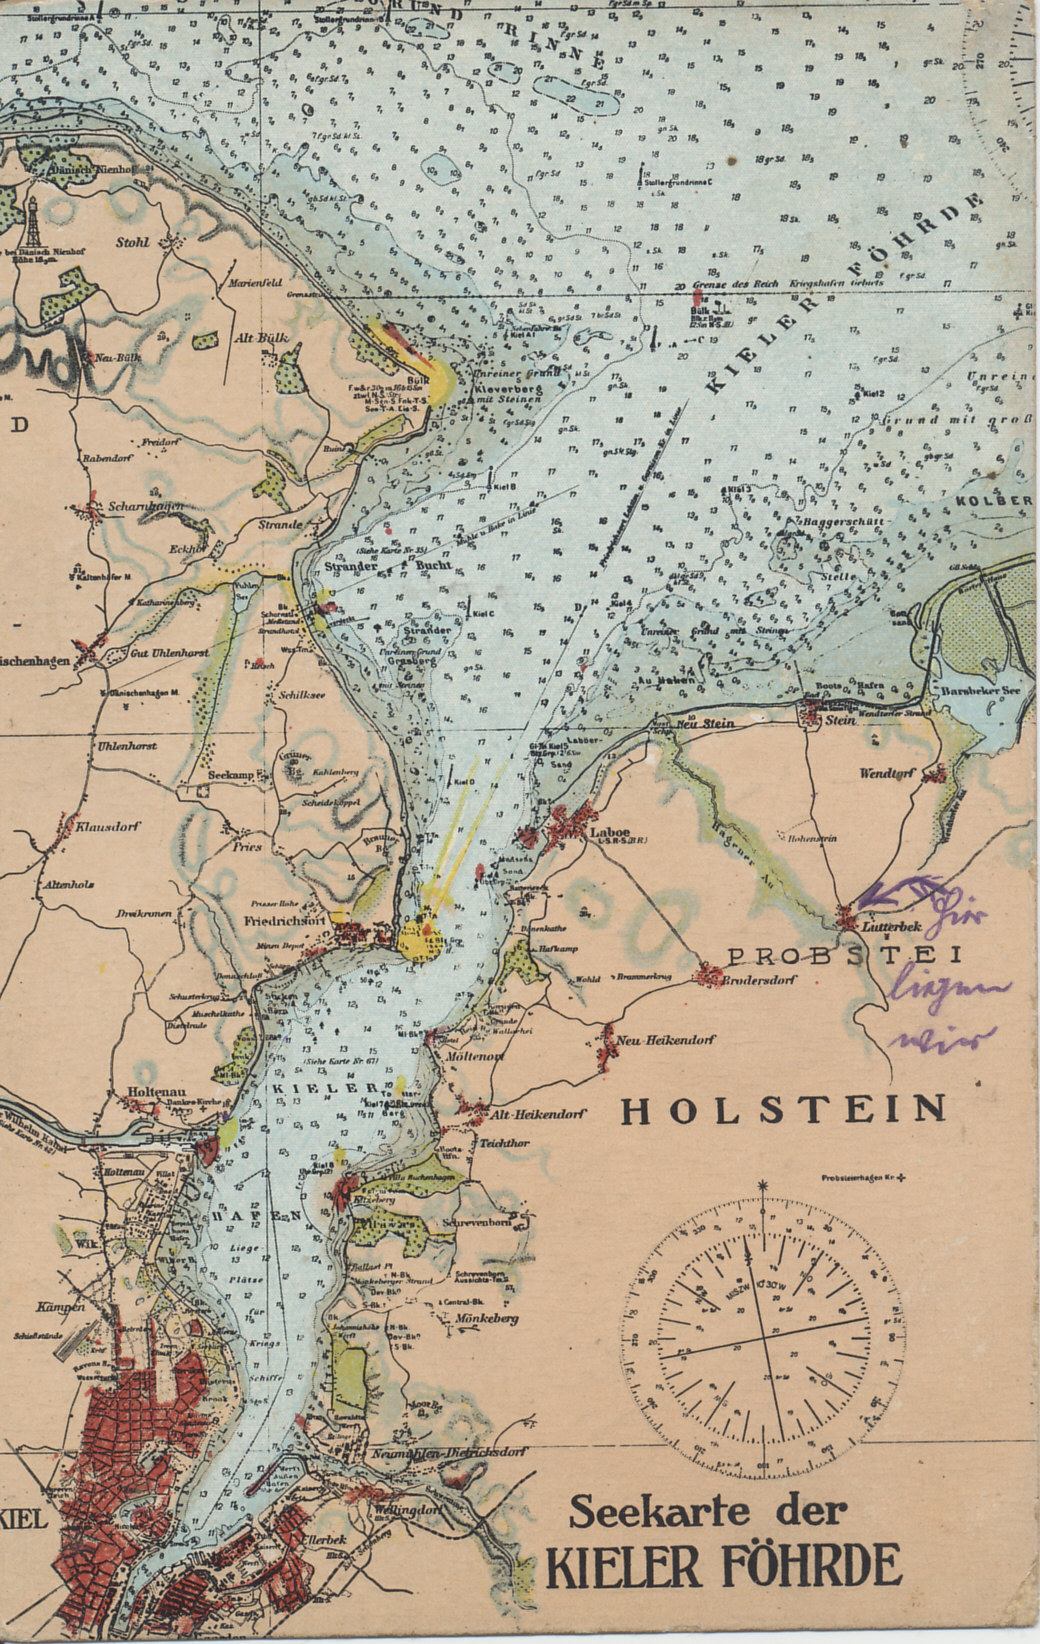 Nautical chart of the Kiel Fjord on the Baltic Sea, leading to Kiel, one of the home ports of the German Baltic Fleet. ? Just north of Kiel is the entrance to the Kaiser Wilhelm Canal, which crosses the Jutland Peninsula in the state of Schleswig-Holstein, and carries traffic to the mouth of the River Elbe on the North Sea.
Text:
Seekarte der Kieler Föhrde (nautical chart of the Kiel Fjord, Holstein, Kiel itself, and the towns of Laboe and Friedrichsort (and its lighthouse) at the mouth of the fjord.
Someone has annotated the town of Lutterbek.
Reverse:
Field postmarked Laboe, July 5, 1915, 2. Kompagnie I. Seewehr-Abteilung (Company 2, Coast Guard Department???
Verlag v. Franz Heinrich, Laboe-Kiel. Nachdruck verboten 1911. Mit Genehmigung der nautischen Abteilung des Reichs-Marine-Amtes, Berlin (Published by Franz Heinrich, Laboe, Kiel. Reproduction prohibited 1911. With the approval of the Nautical Department of the Reich Naval Office in Berlin).